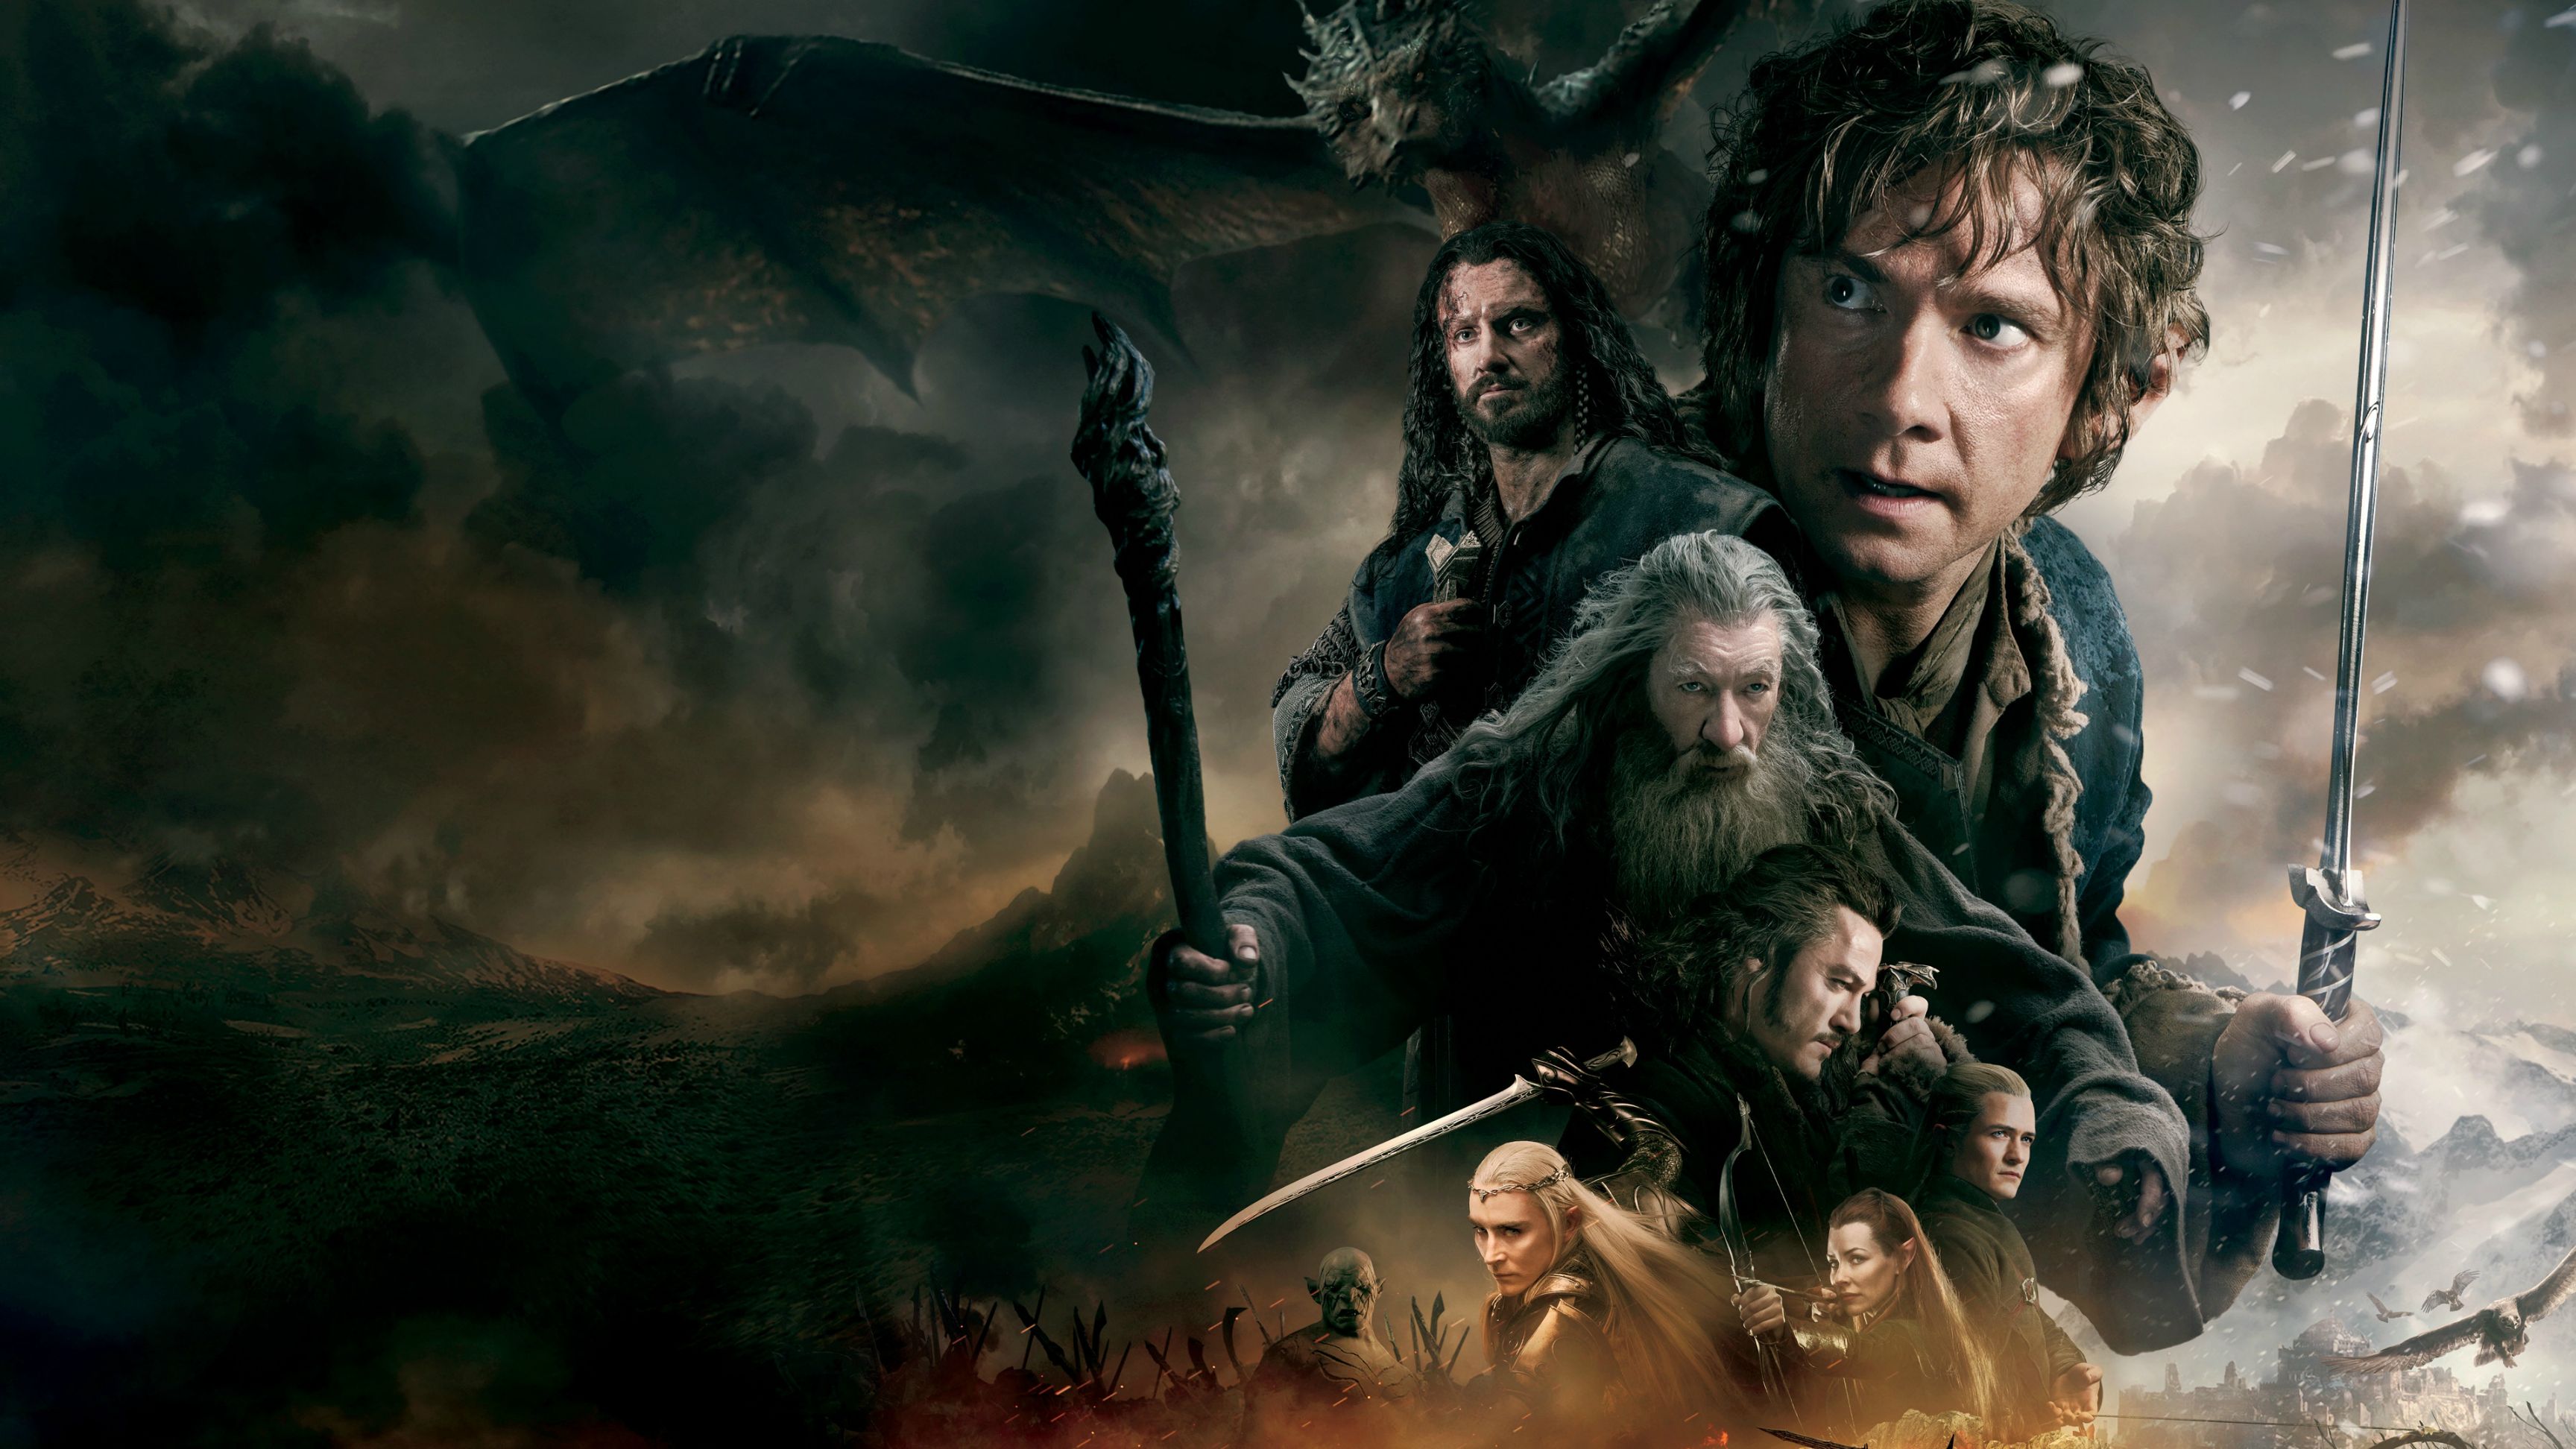 Movie The Hobbit The Desolation of Smaug 4k Ultra HD Wallpaper